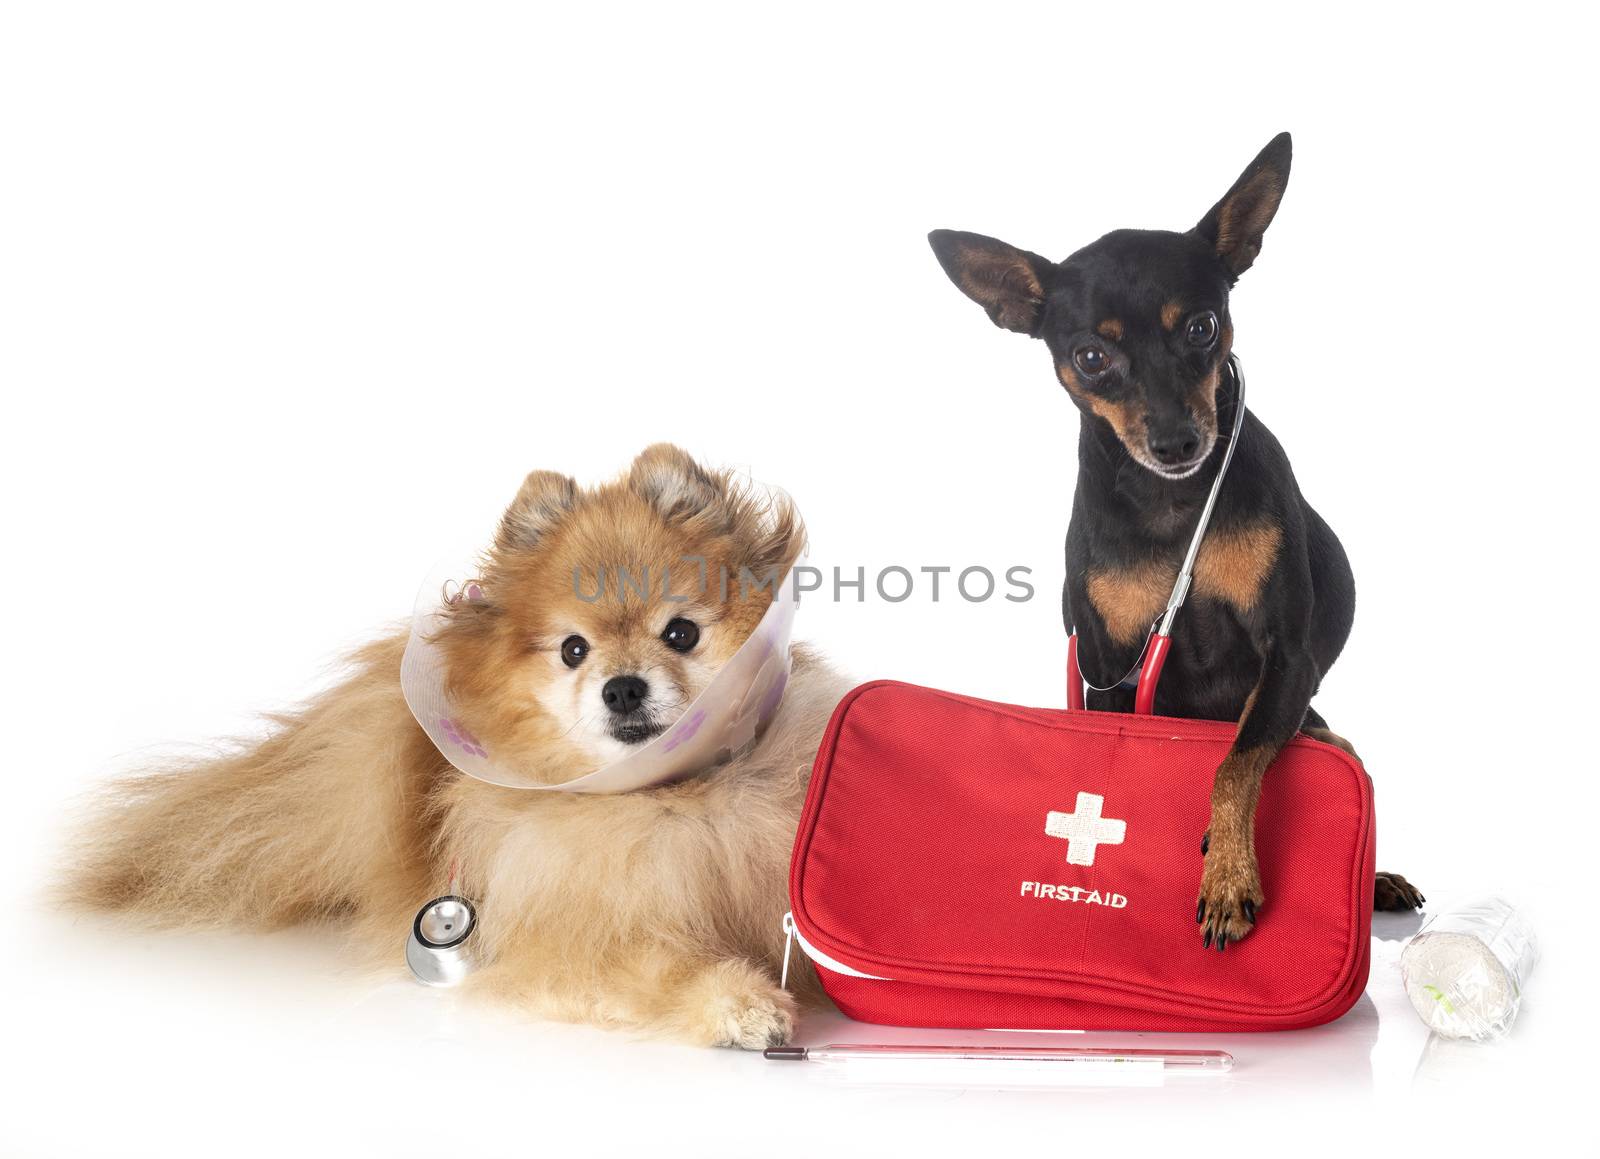 miniature pinscher and spitz  in front of white background